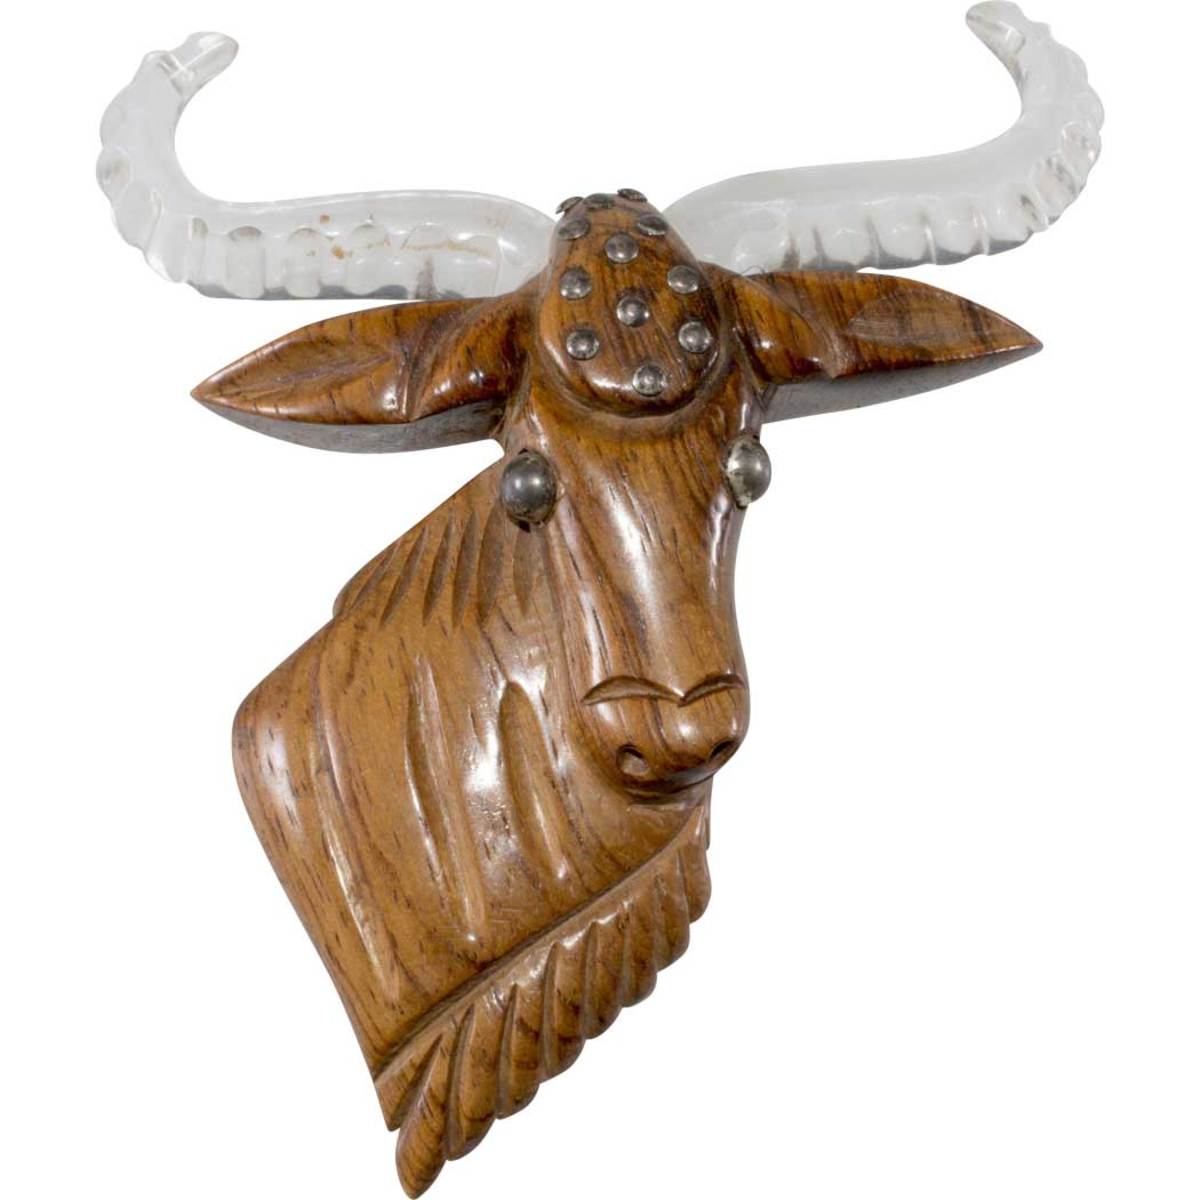 Longhorn brooch made  of wood and Lucite,  c. 1940.